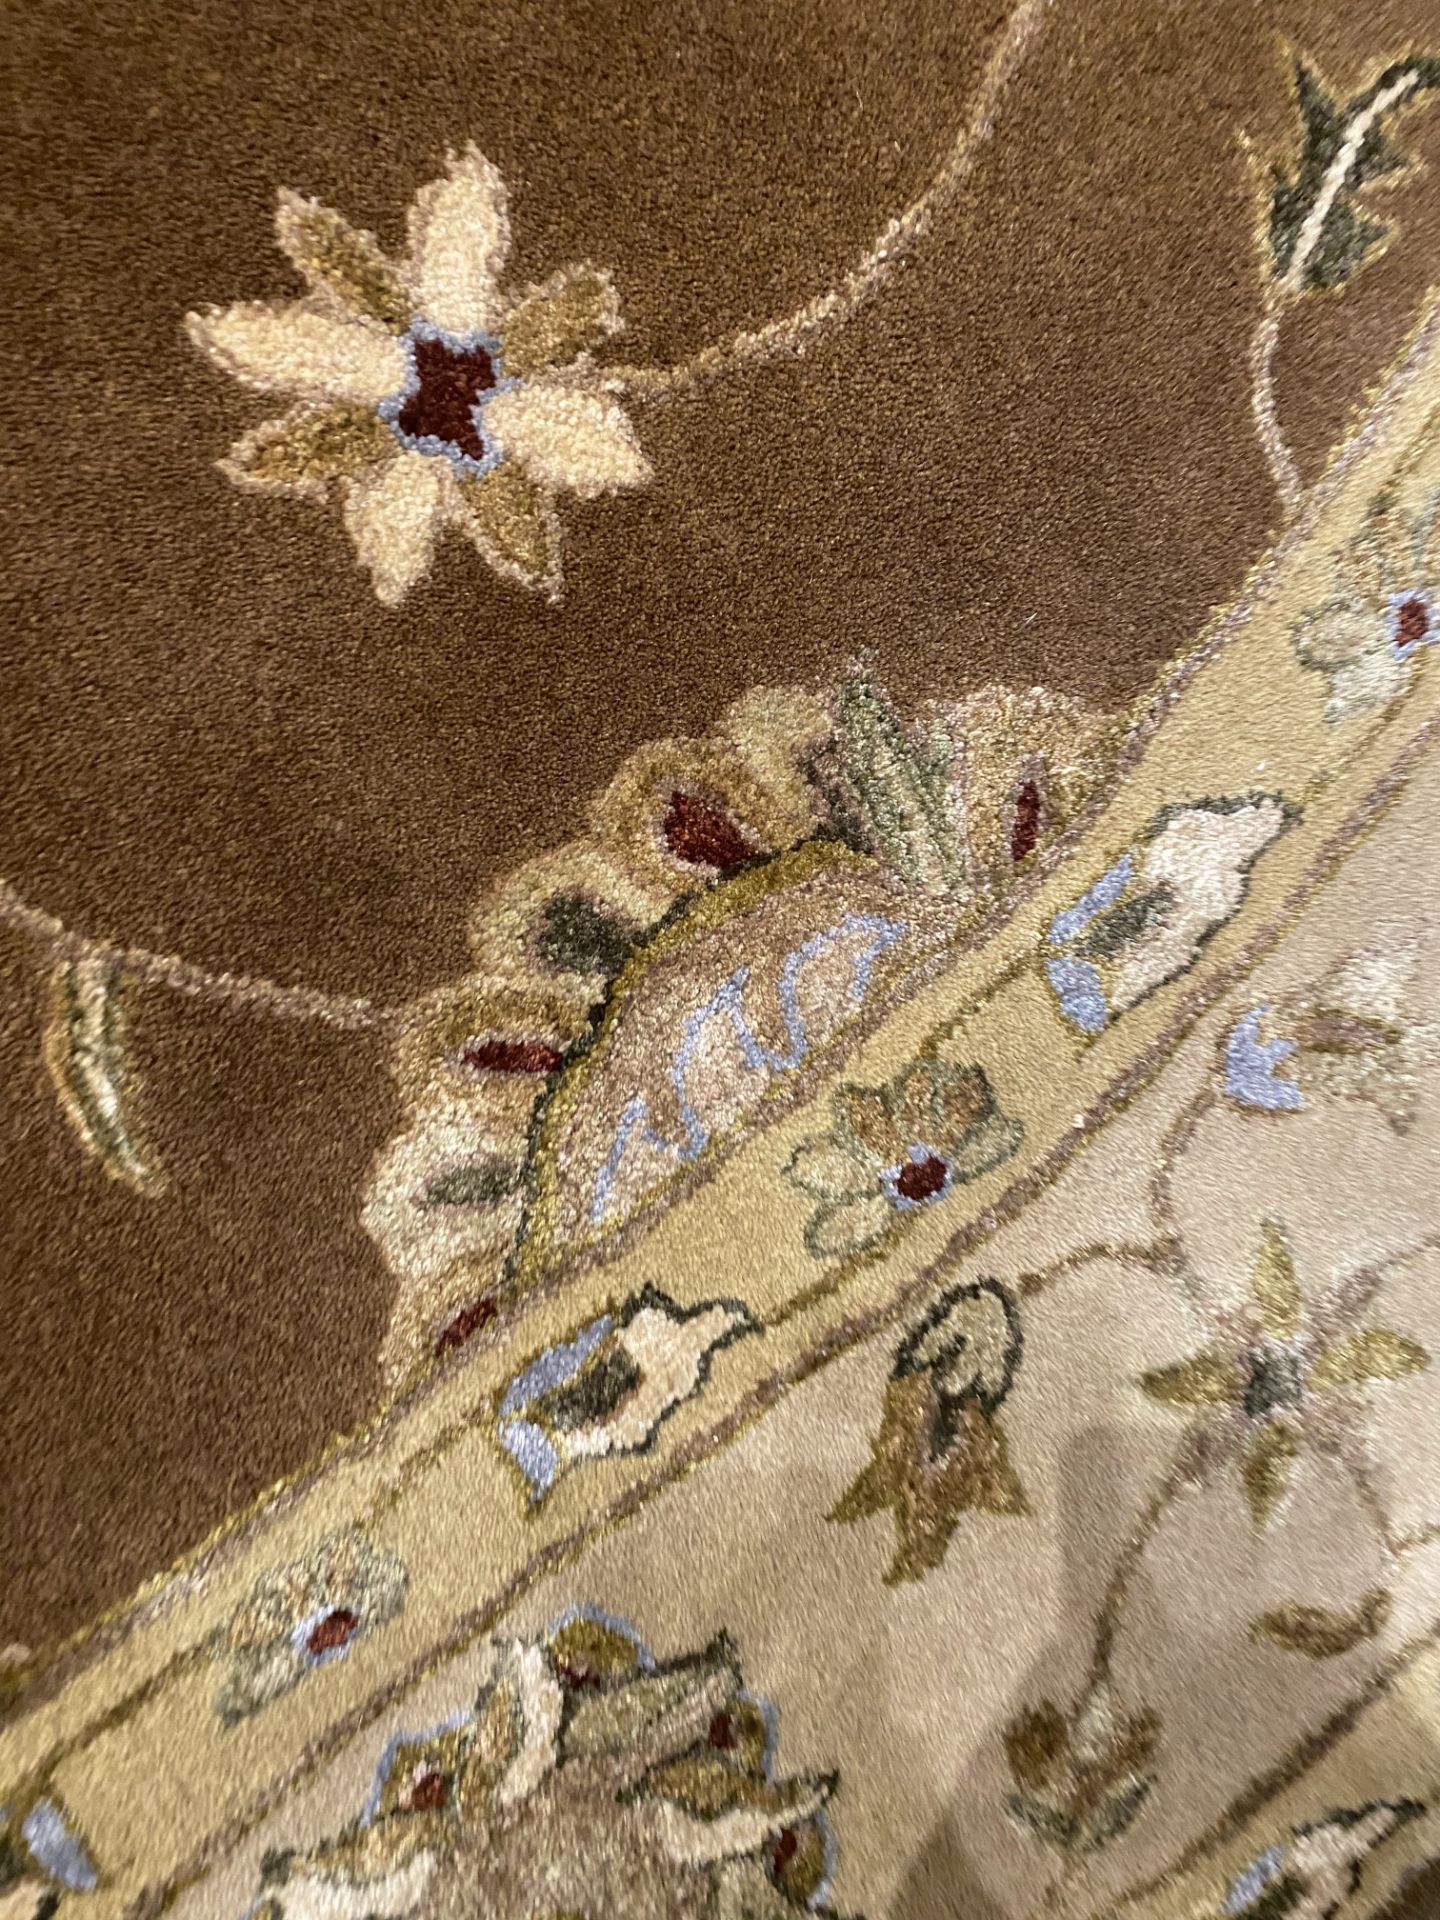 8' ROUND WOOL/A.SILK HAND MADE IN INDIA, MSRP $1,995, INVENTORY CODE PROVENCE IAD8308 BN/BG - Image 2 of 6